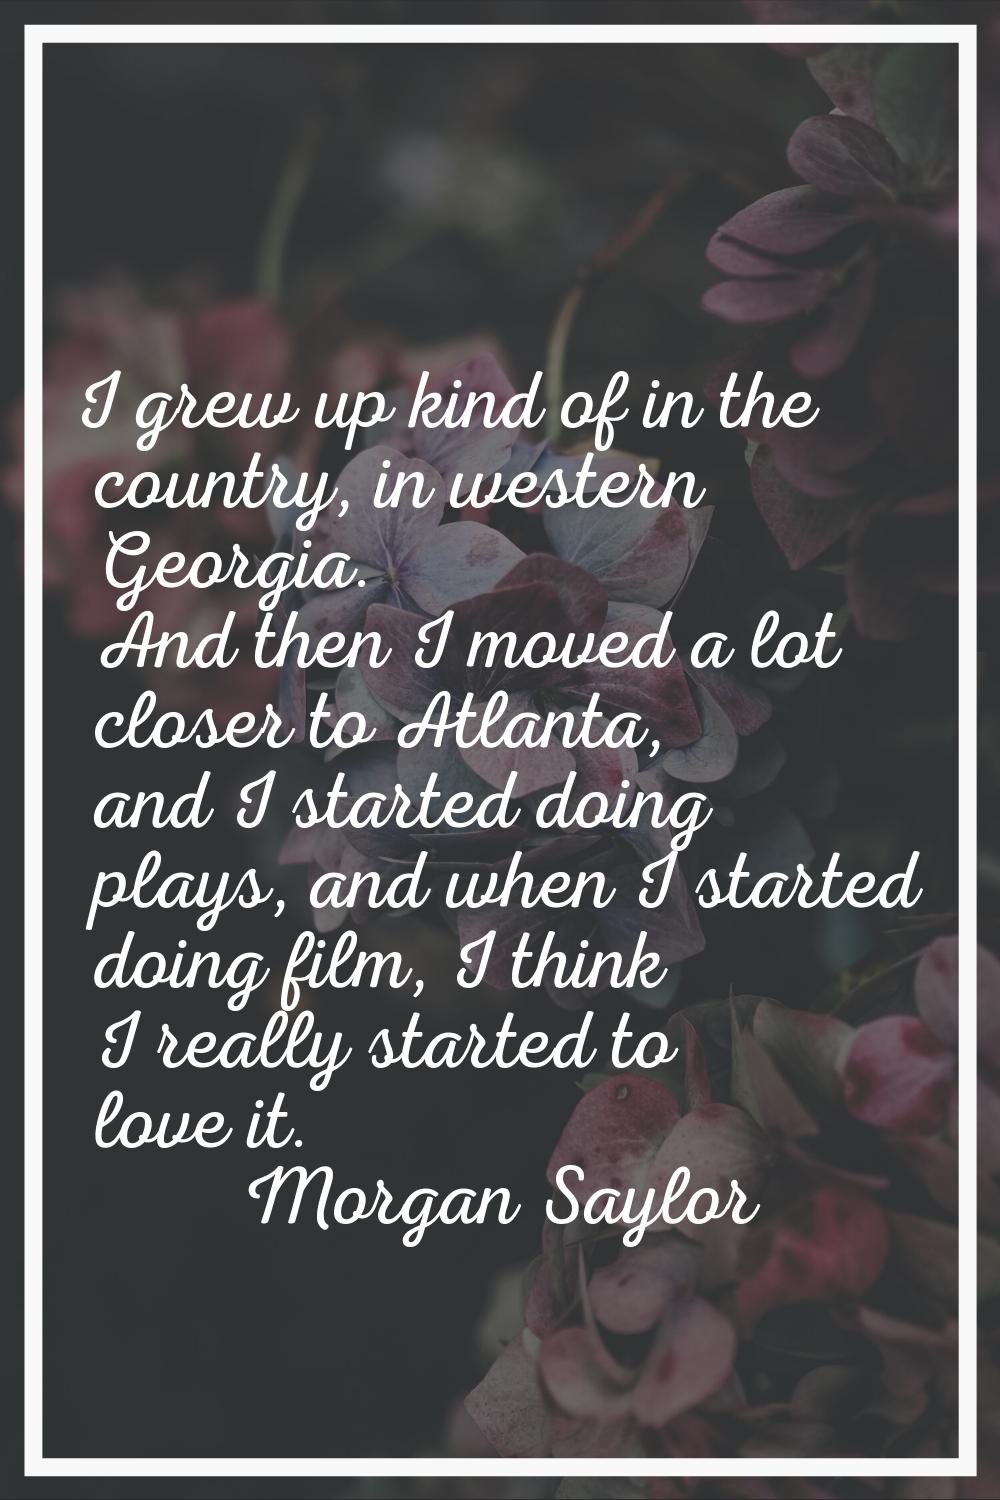 I grew up kind of in the country, in western Georgia. And then I moved a lot closer to Atlanta, and